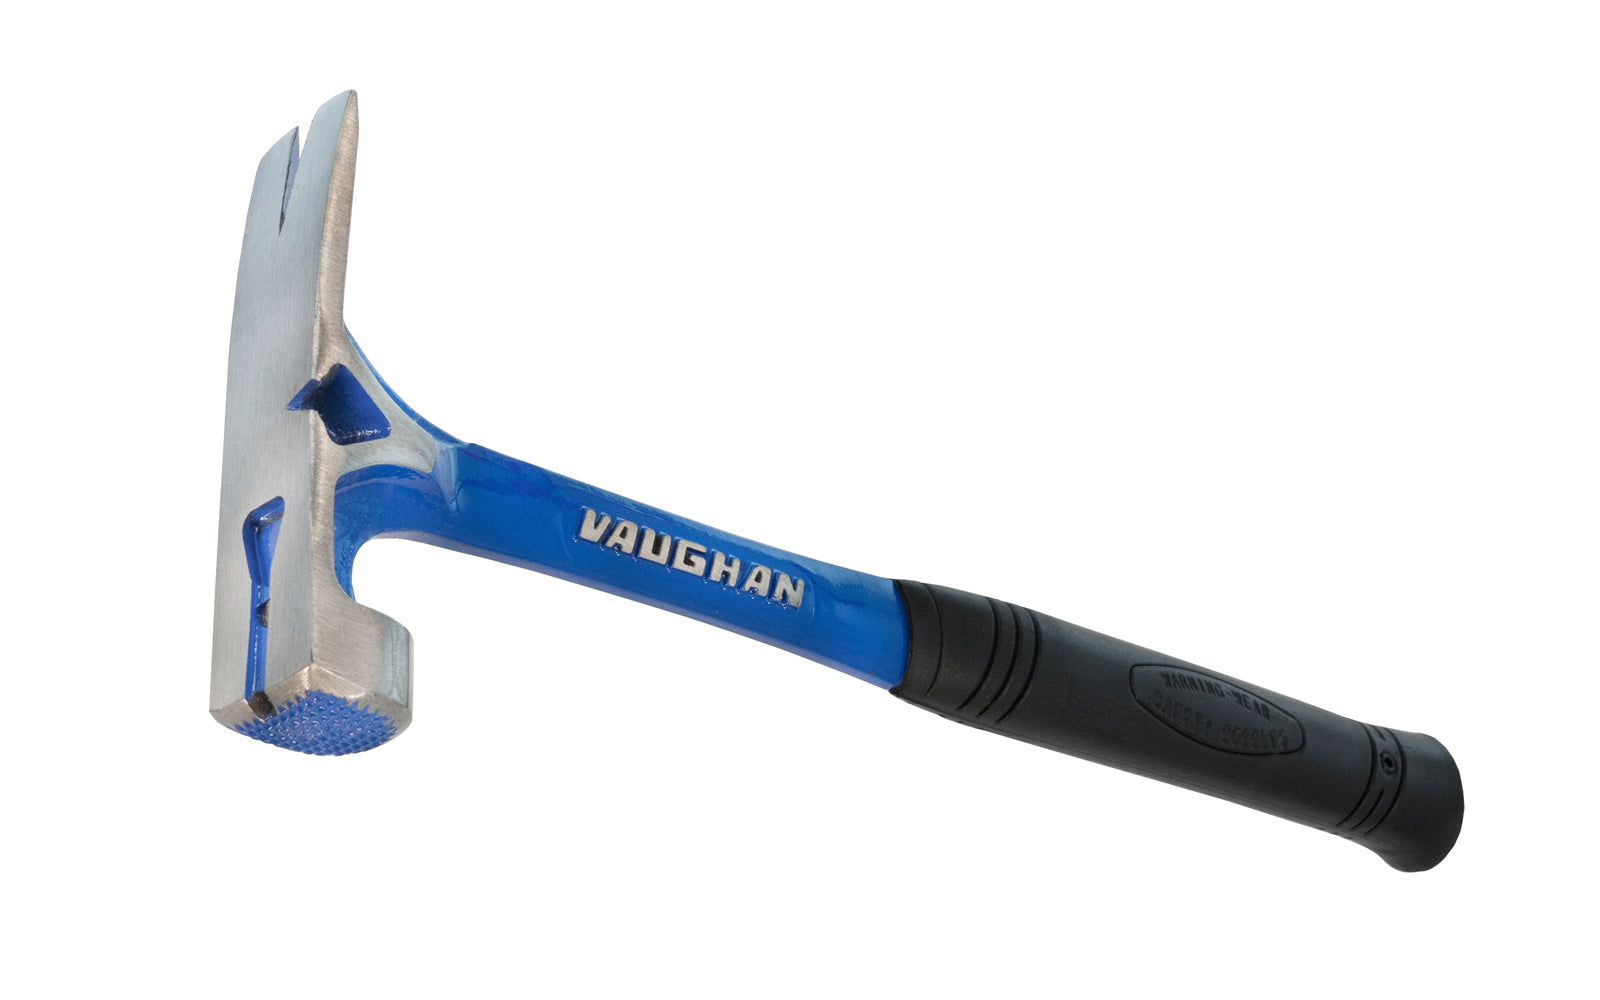 19 oz Vaughan mill waffle face forged steel hammer with rust-resistant powder coat finish designed for heavy duty framing & concrete form work. Shorter claws increase strength. Magnetic nail starter holds both standard & duplex nails. Side nail puller provides greater leverage. Molded slip-resistant grip. Made in USA - 051218130300